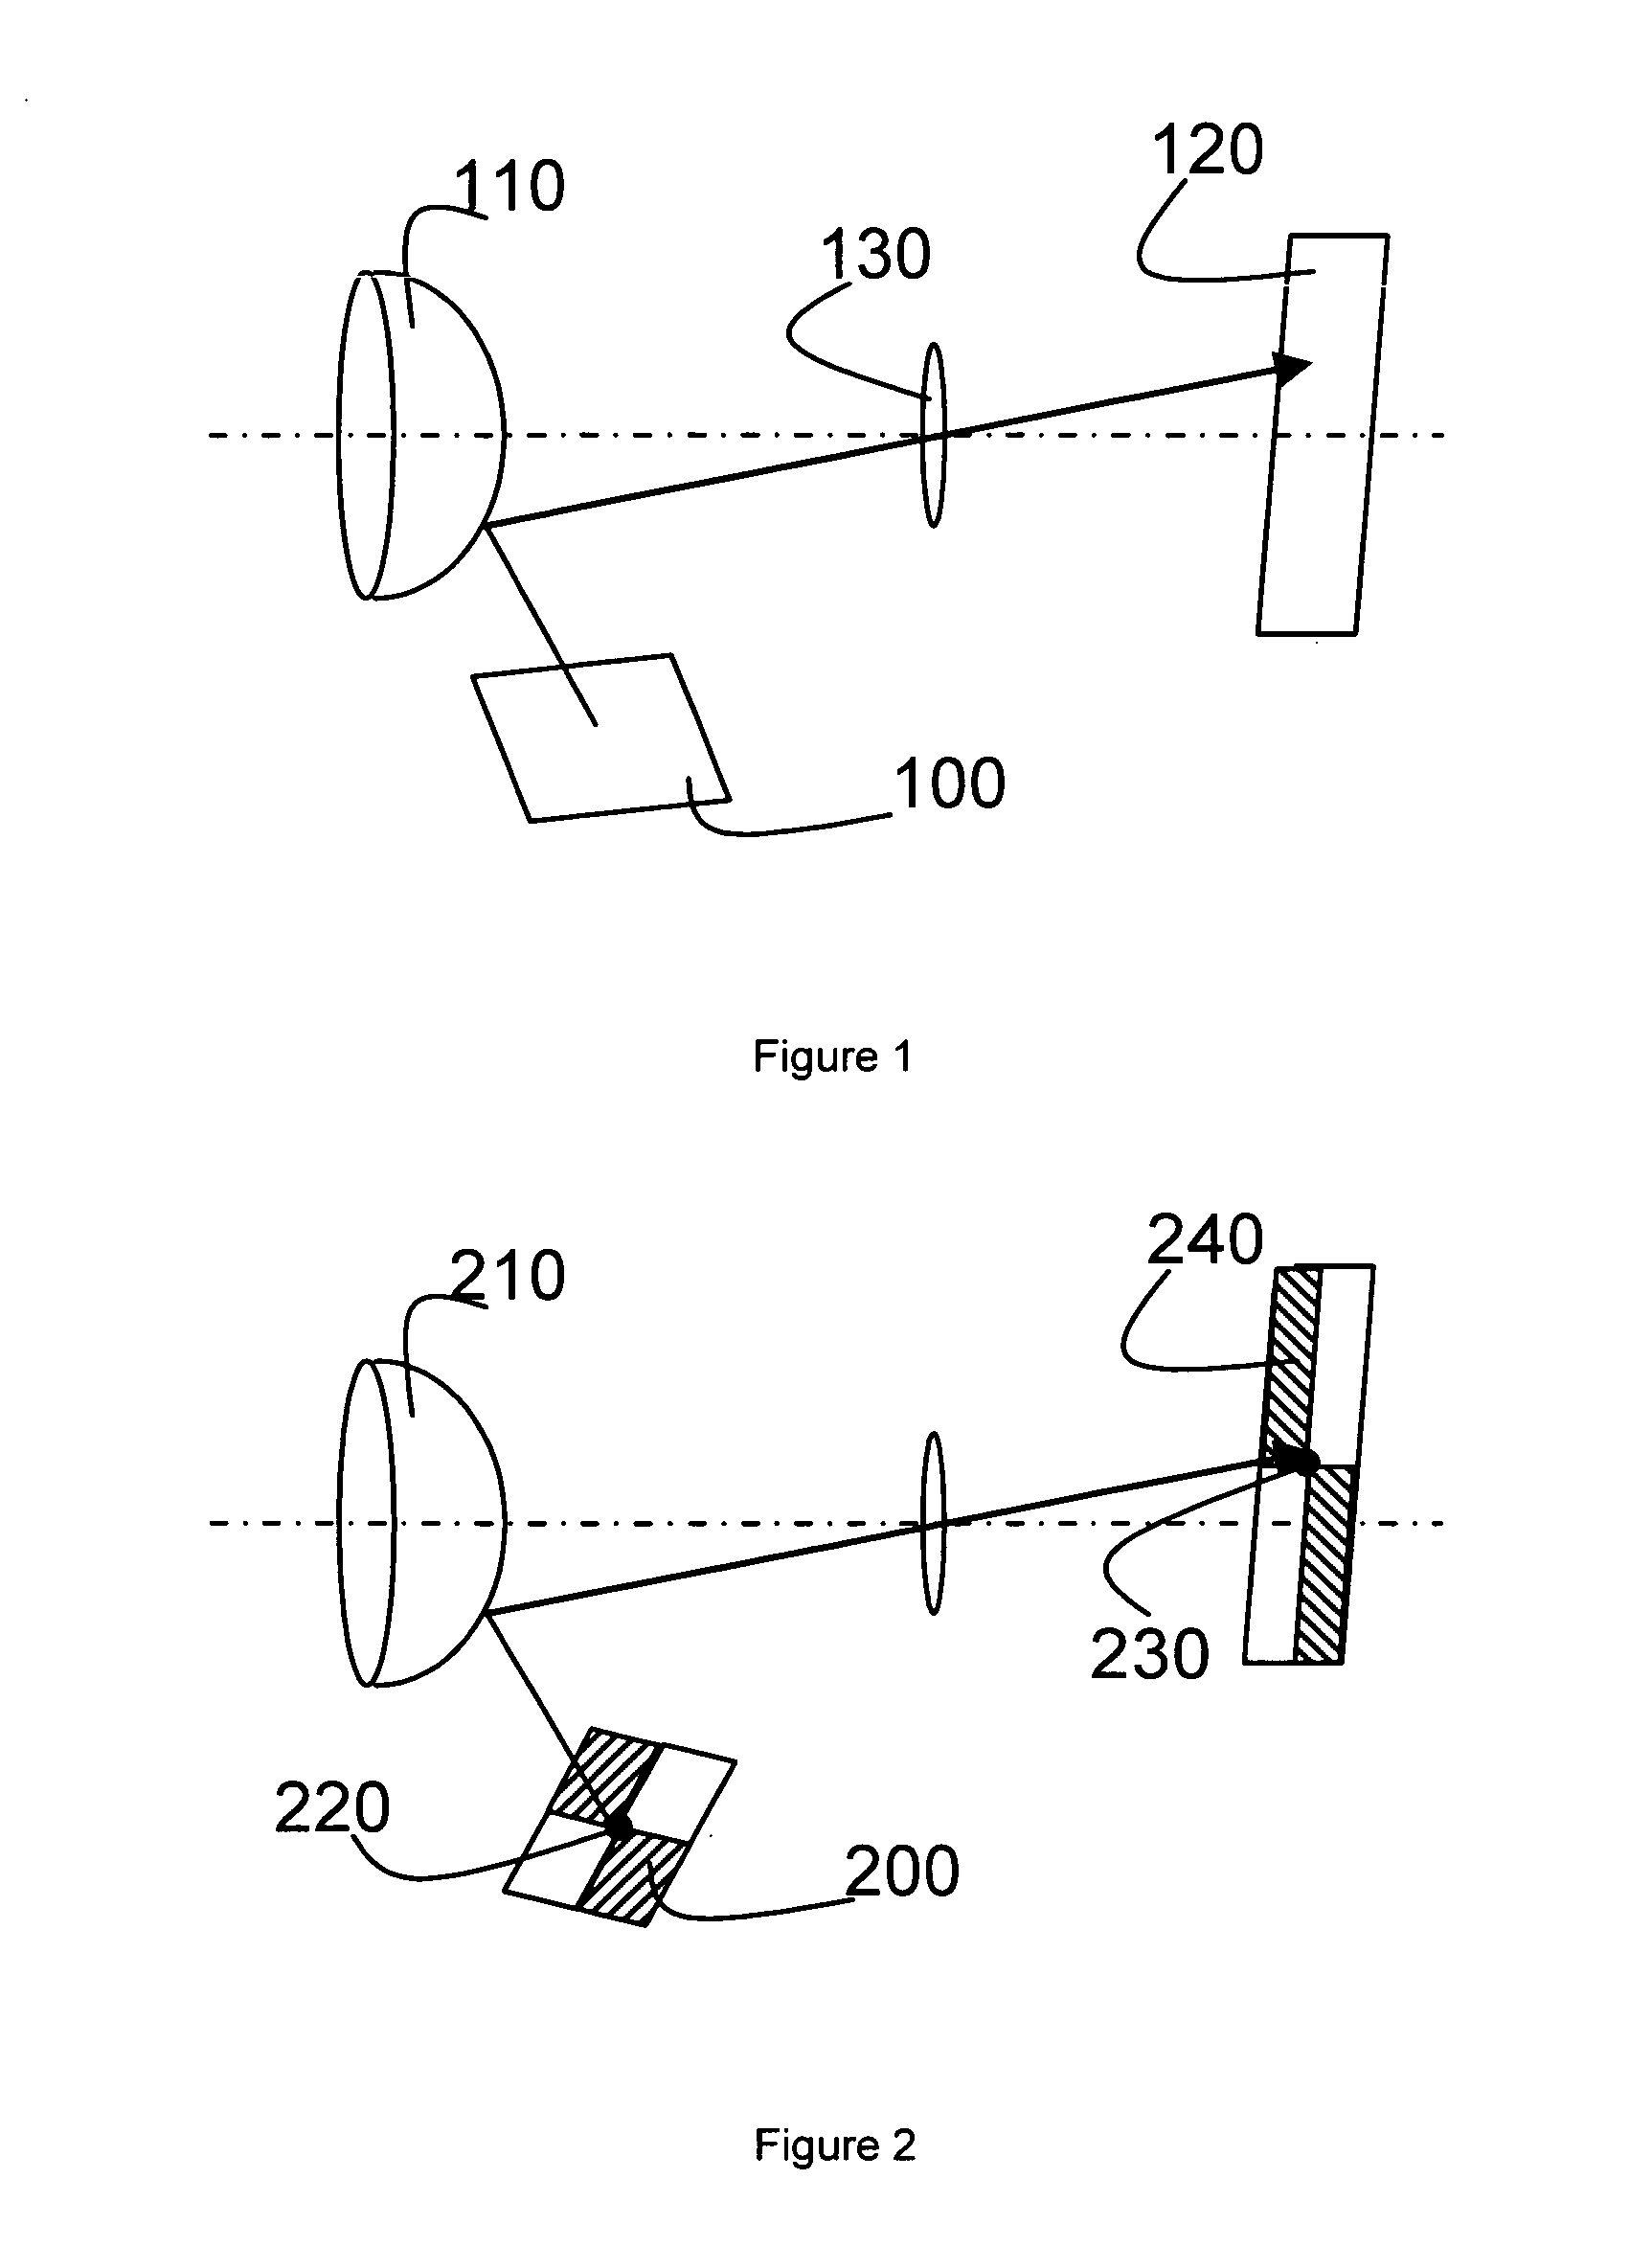 Method of evaluating a reconstructed surface, corneal topographer and calibration method for a corneal topographer